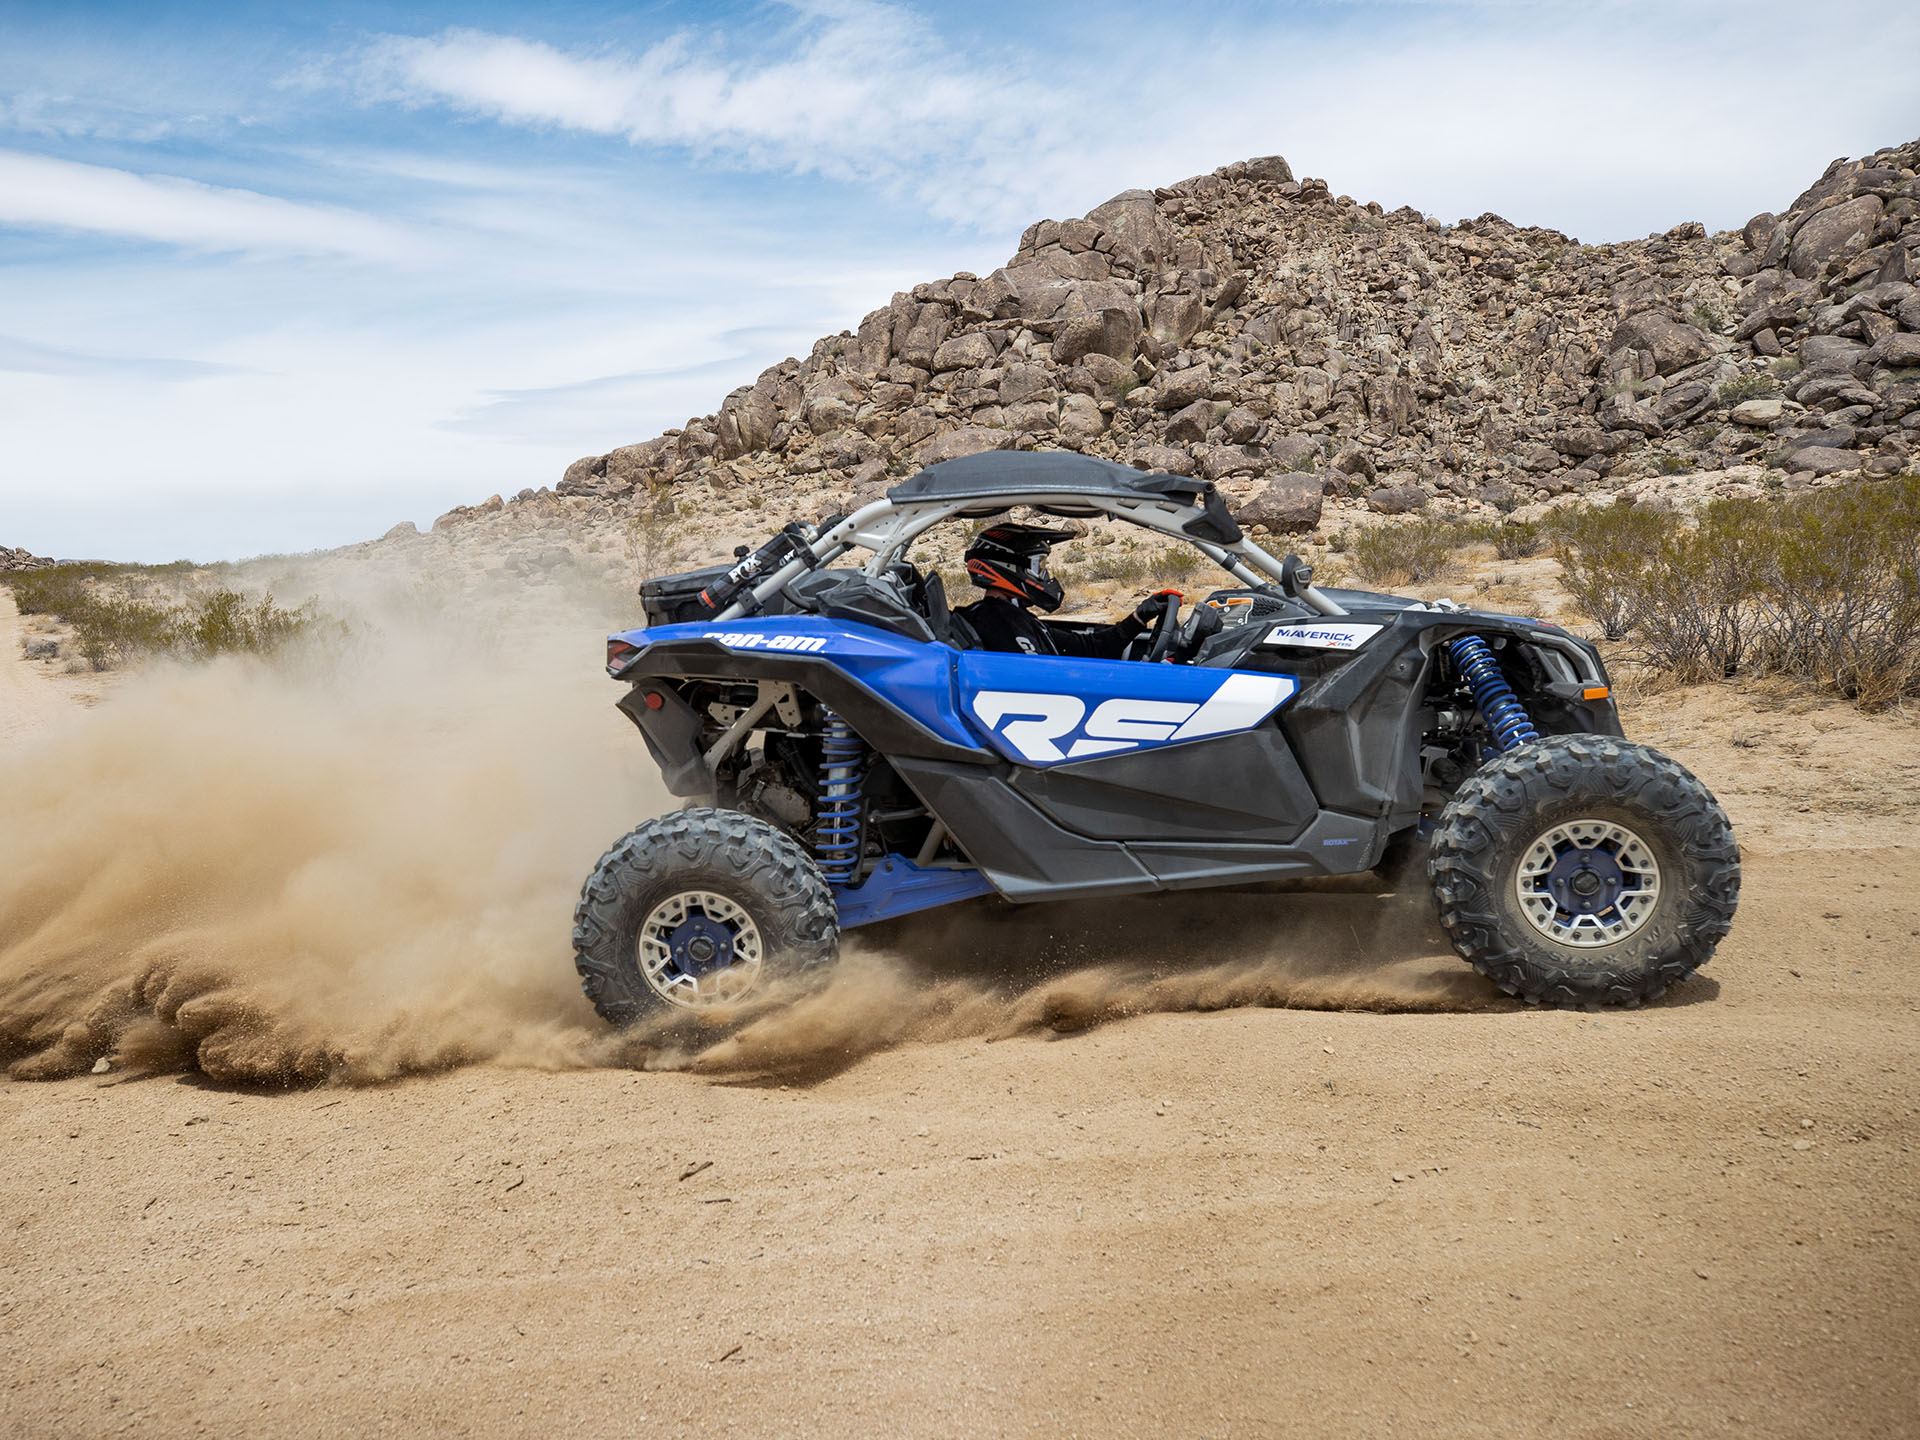 2022 Can-Am Maverick X3 X RS Turbo RR in Louisville, Tennessee - Photo 5